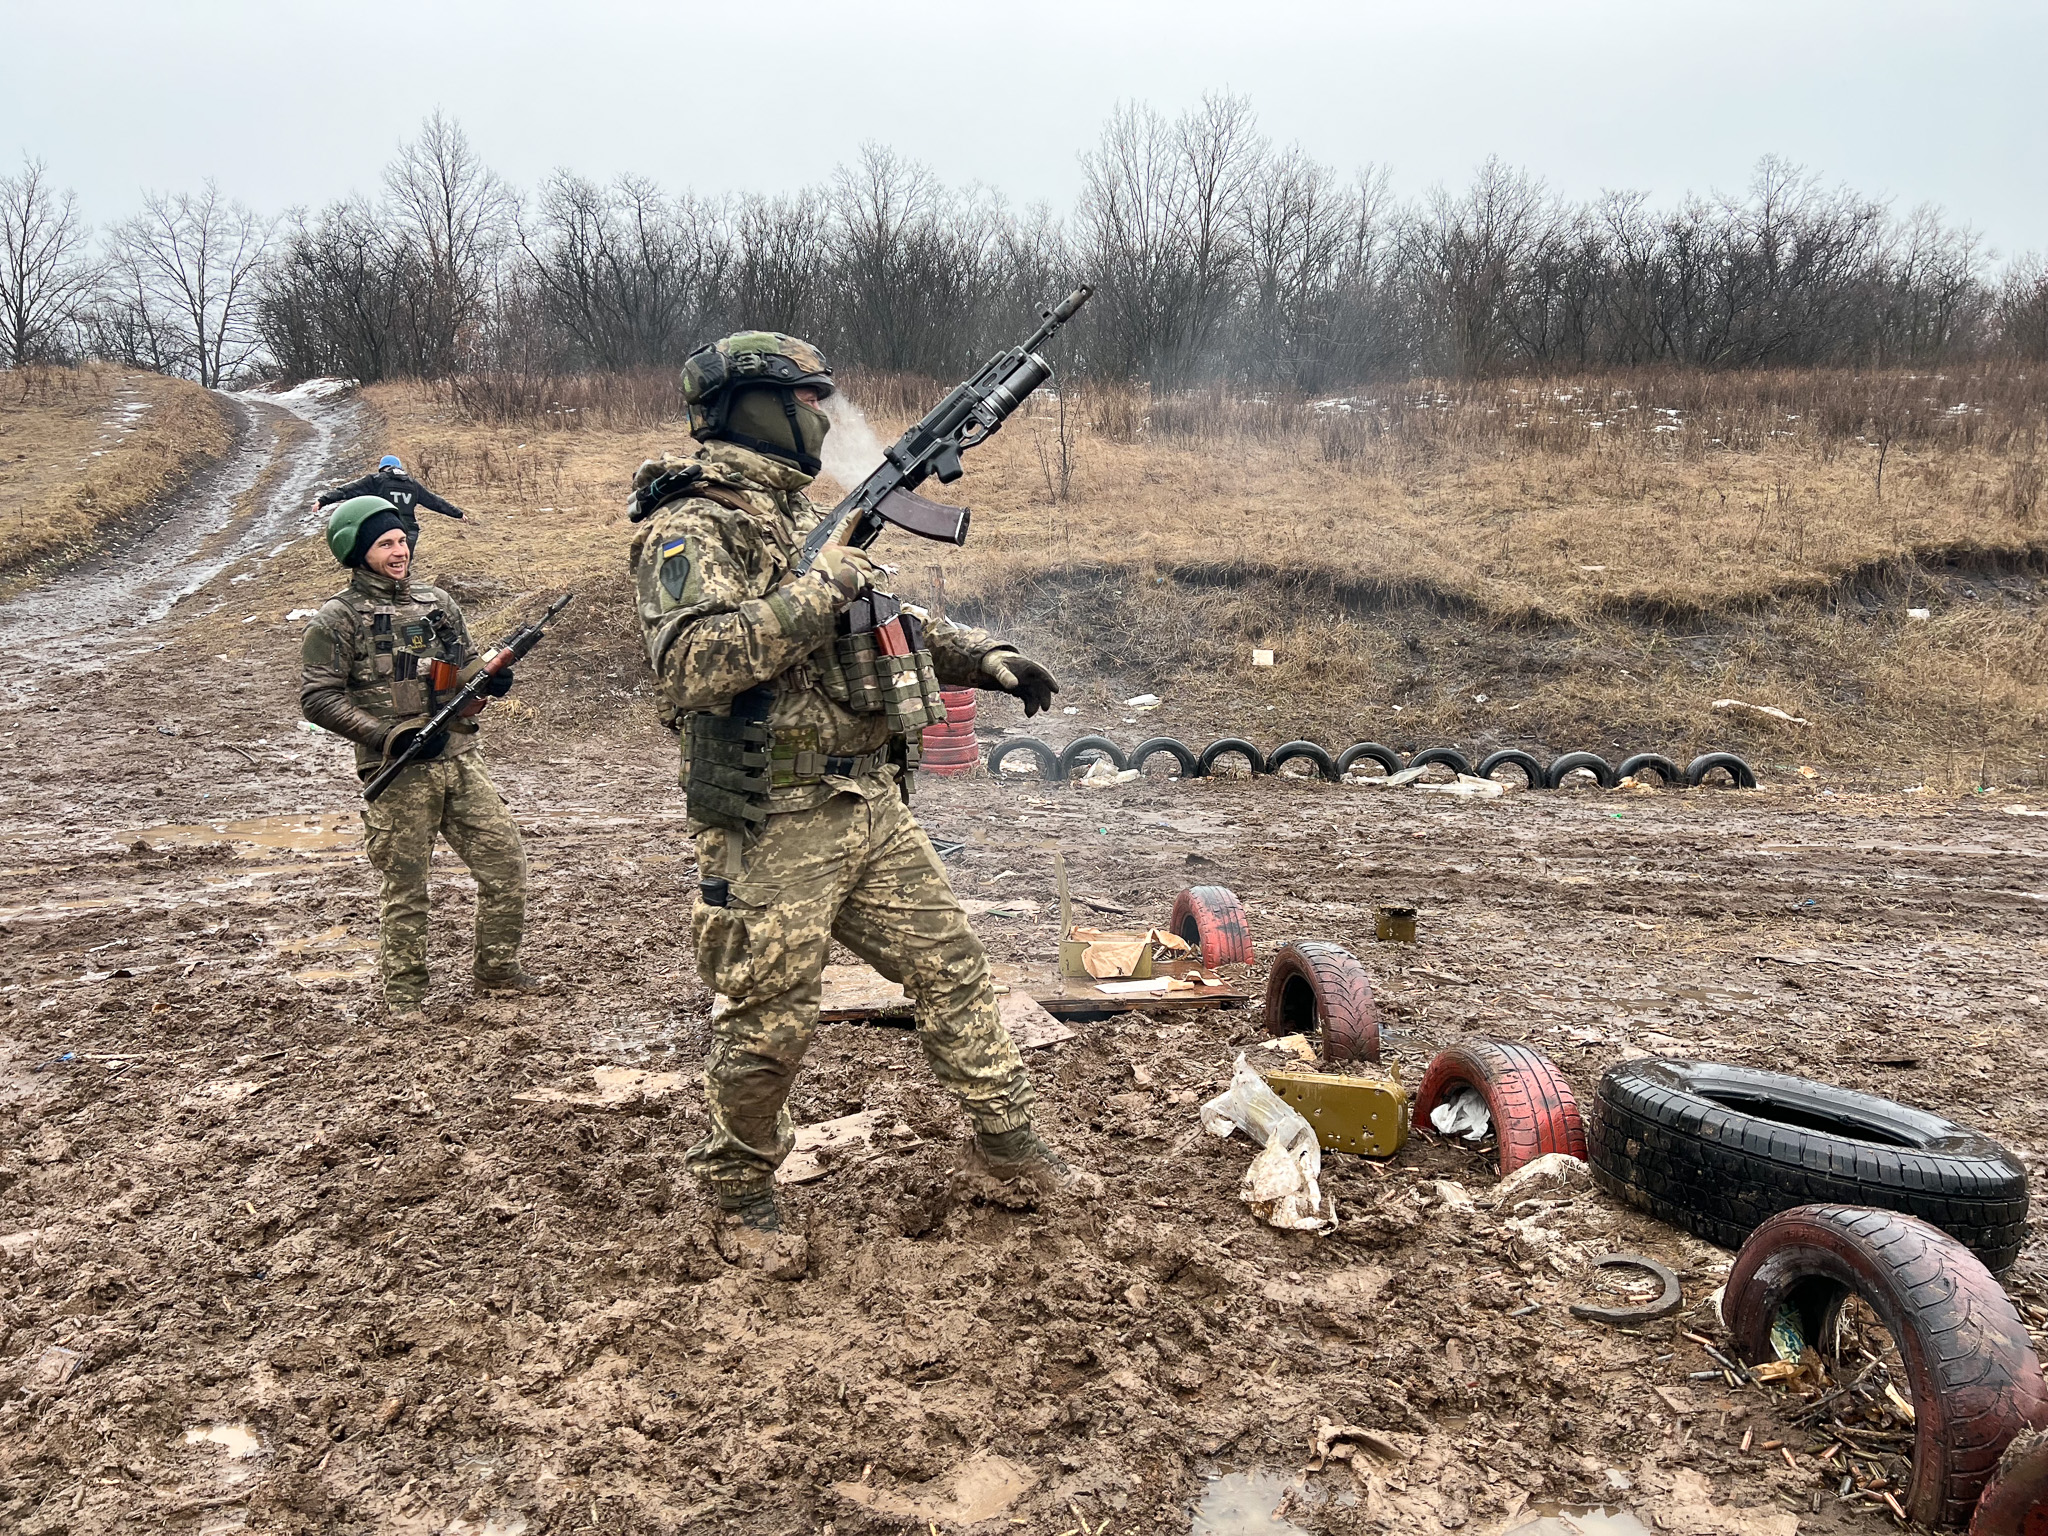 Bakhmut-bound infantry assault troops: 'We are holding on, ready for any scenario’